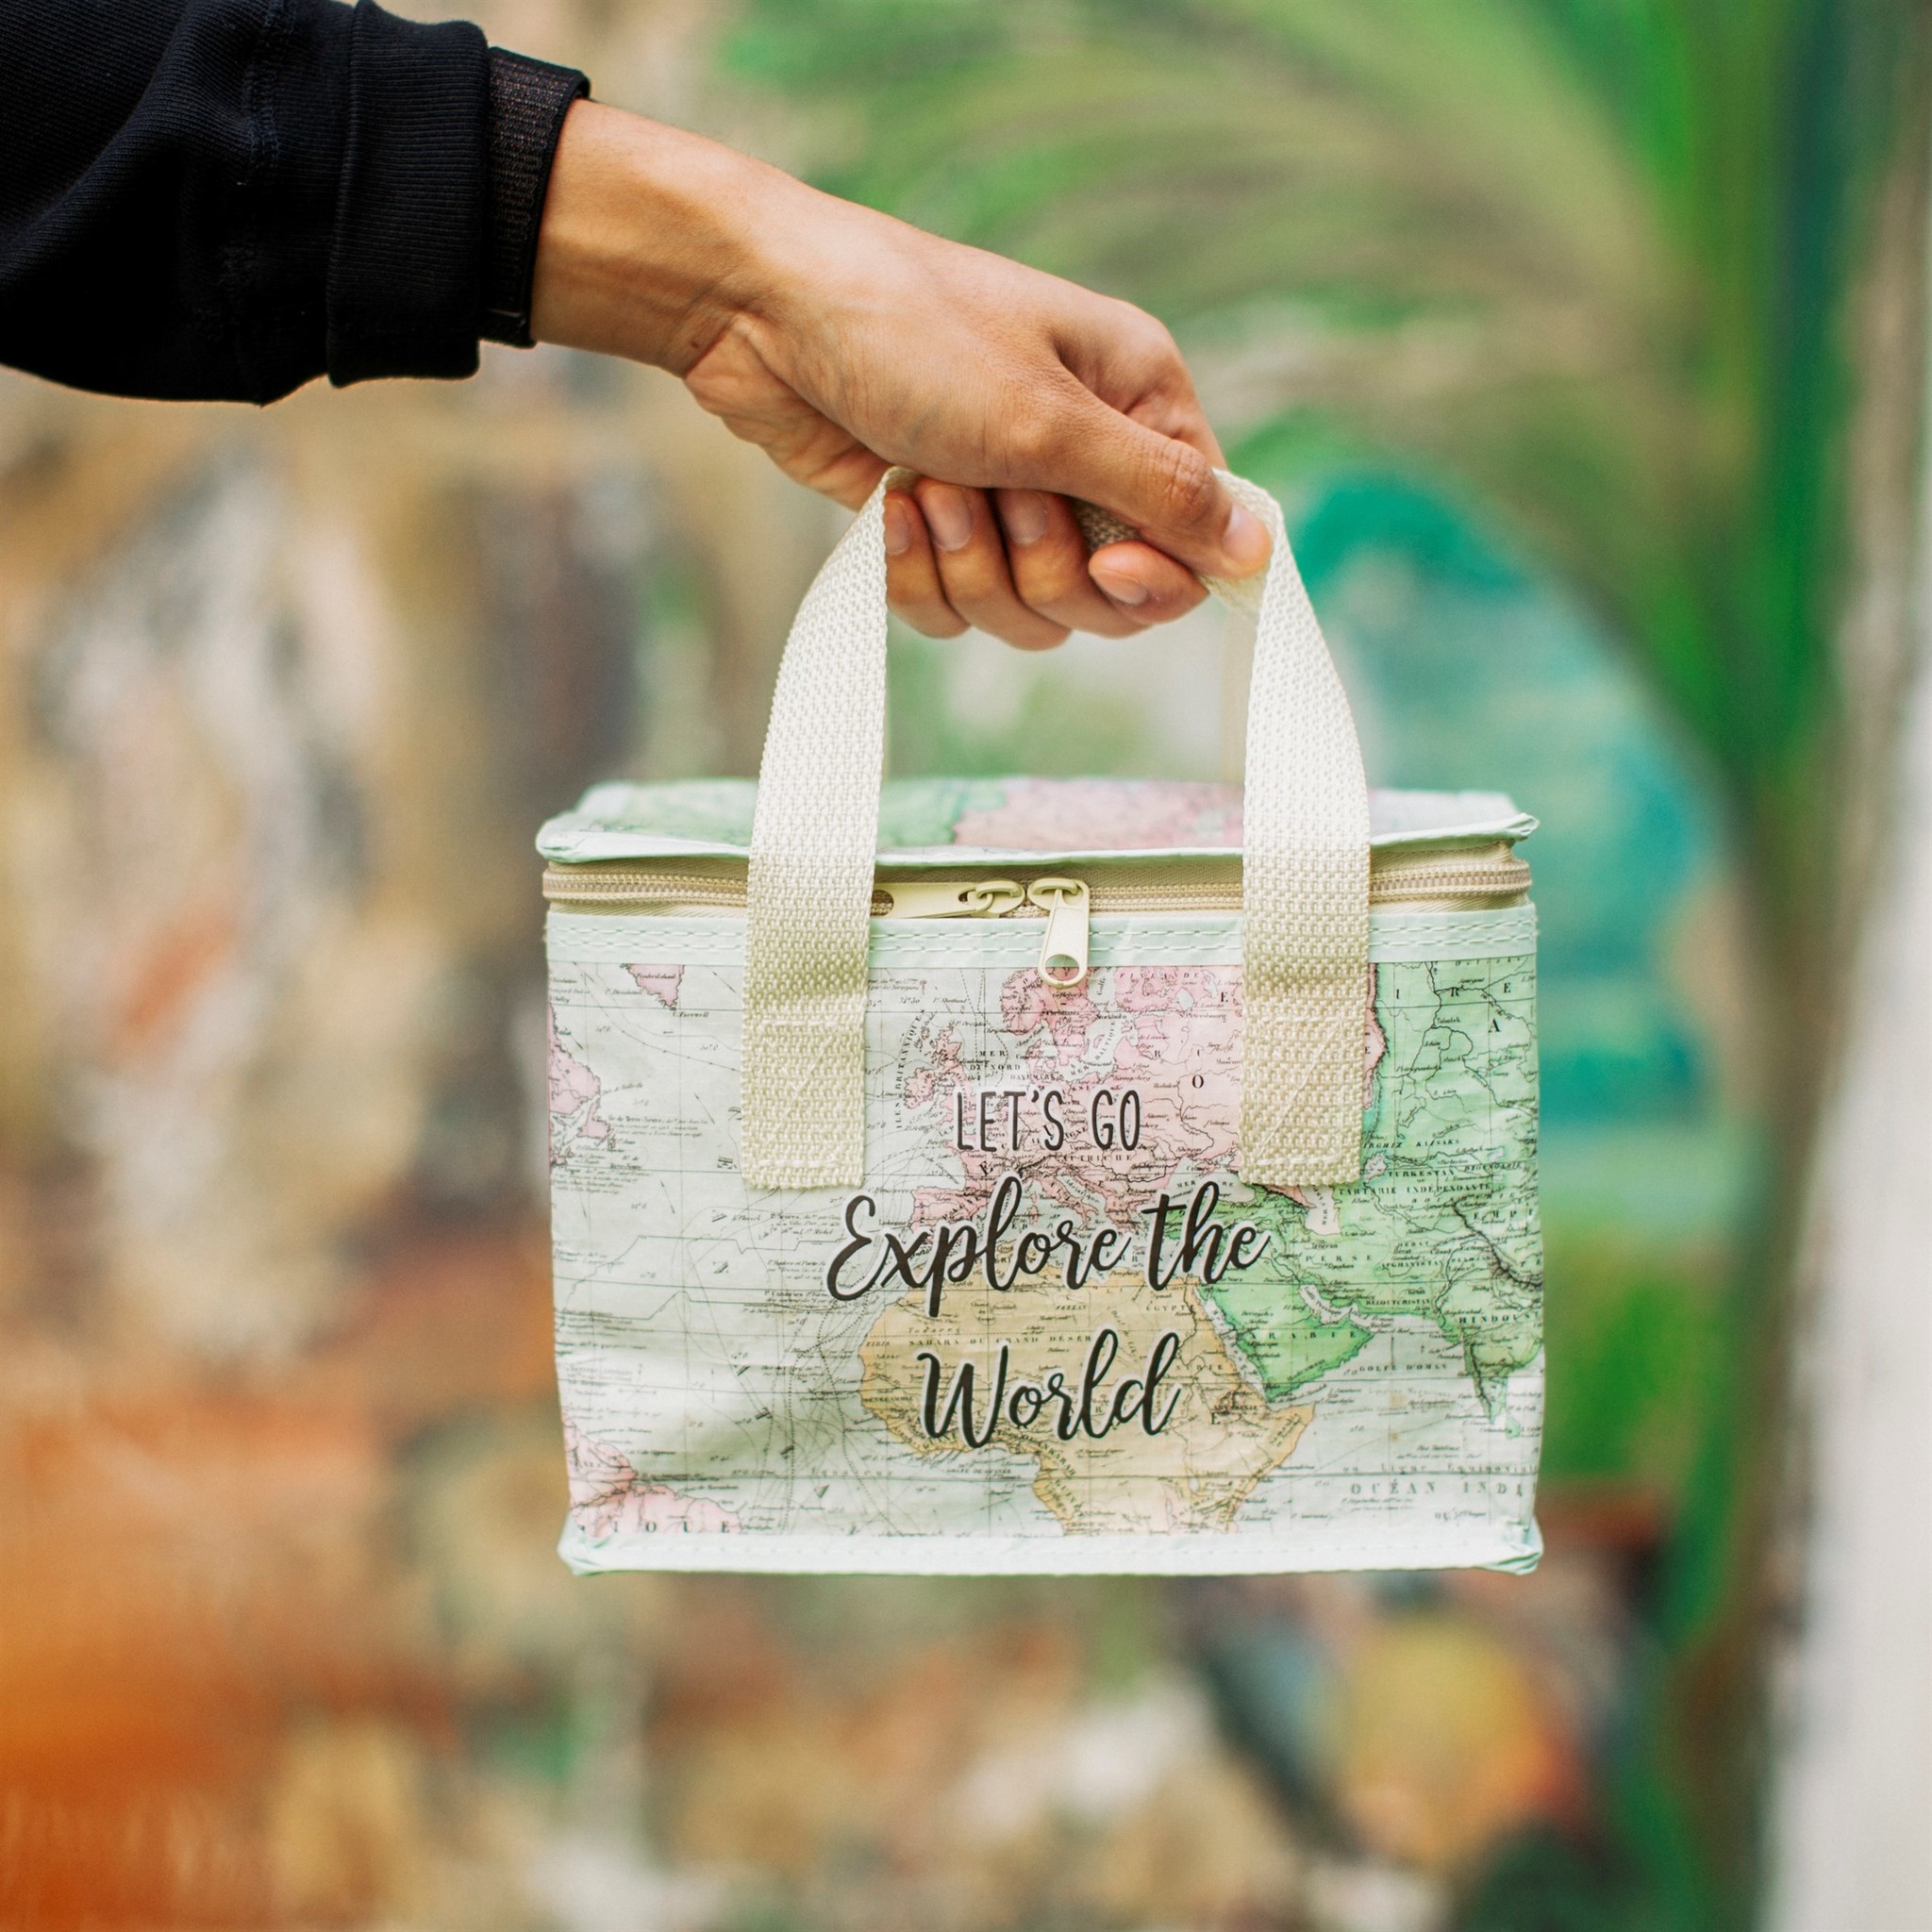 gokken matchmaker Bewust Fraaie thermo lunch tas "Explore the World" | Sass & Belle - JoMilly Vintage